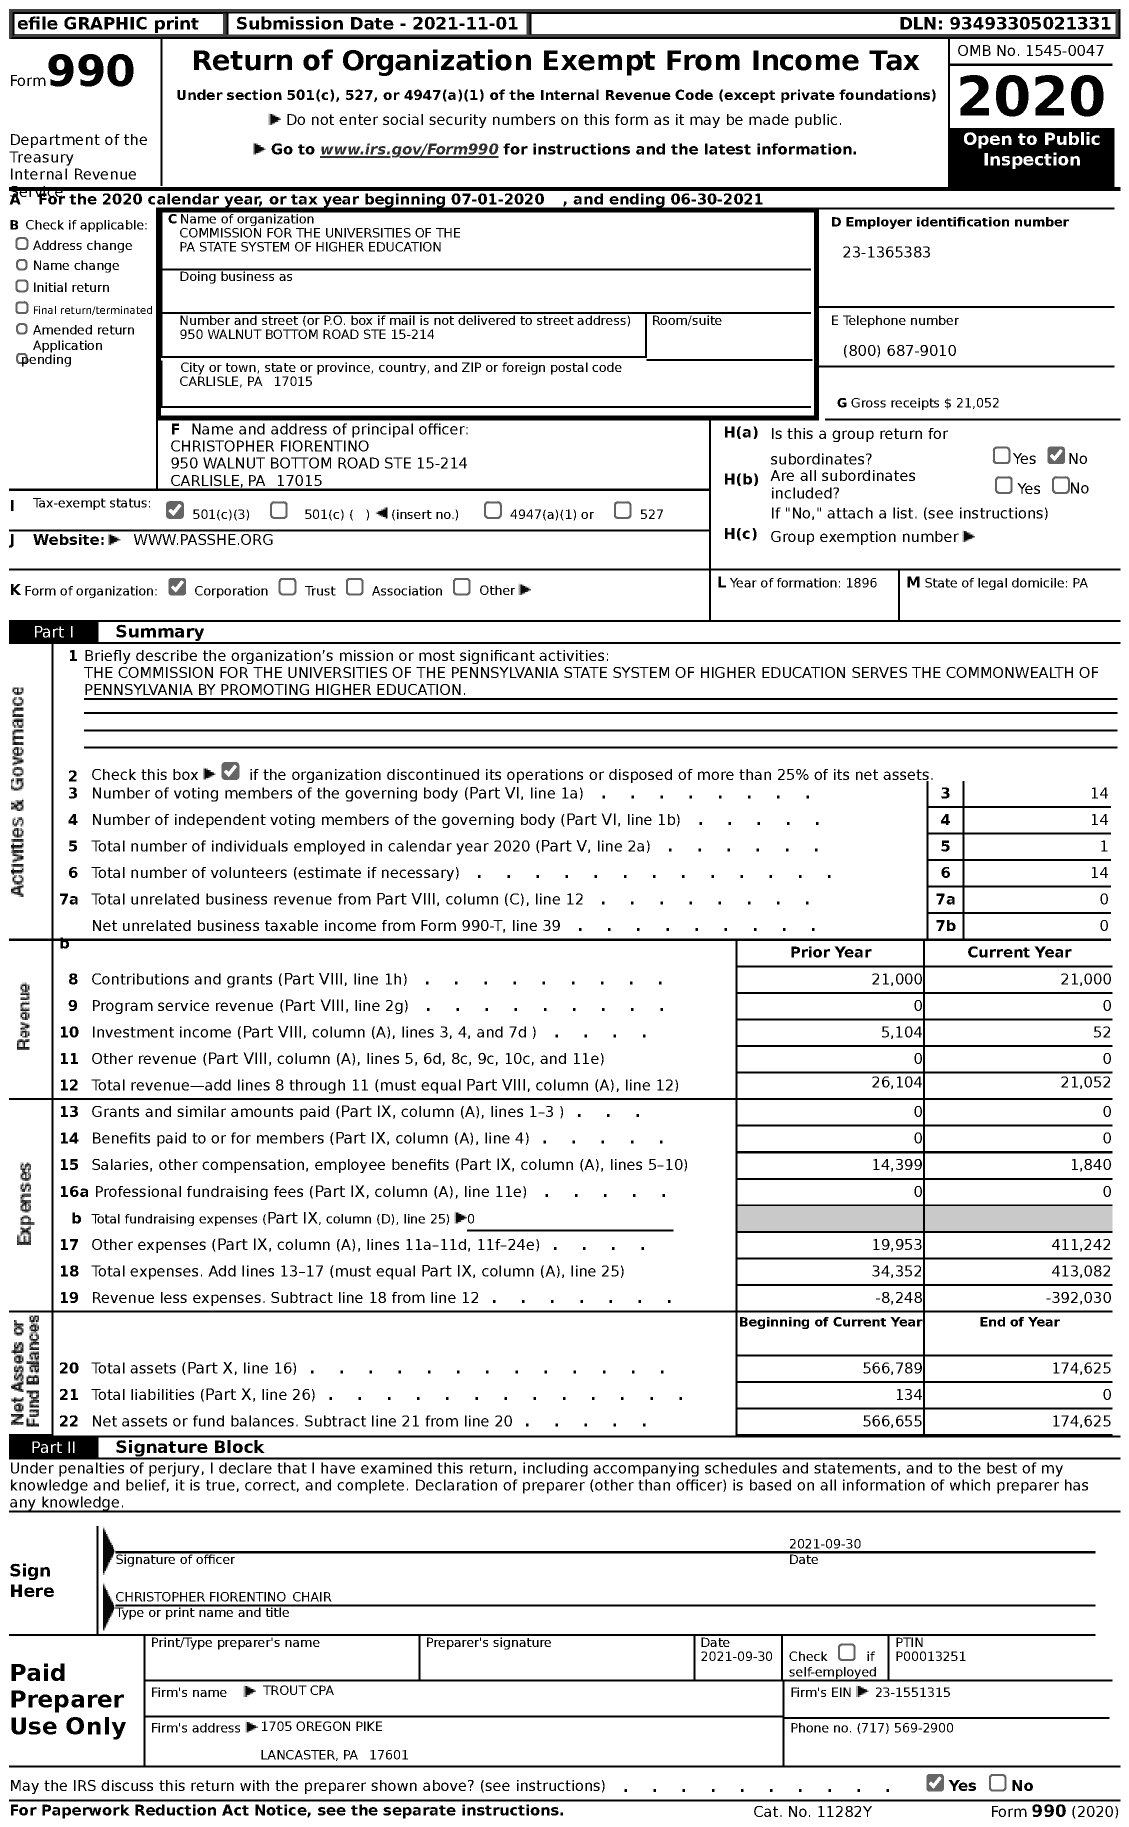 Image of first page of 2020 Form 990 for Commission for the Universities of the Pa State System of Higher Education